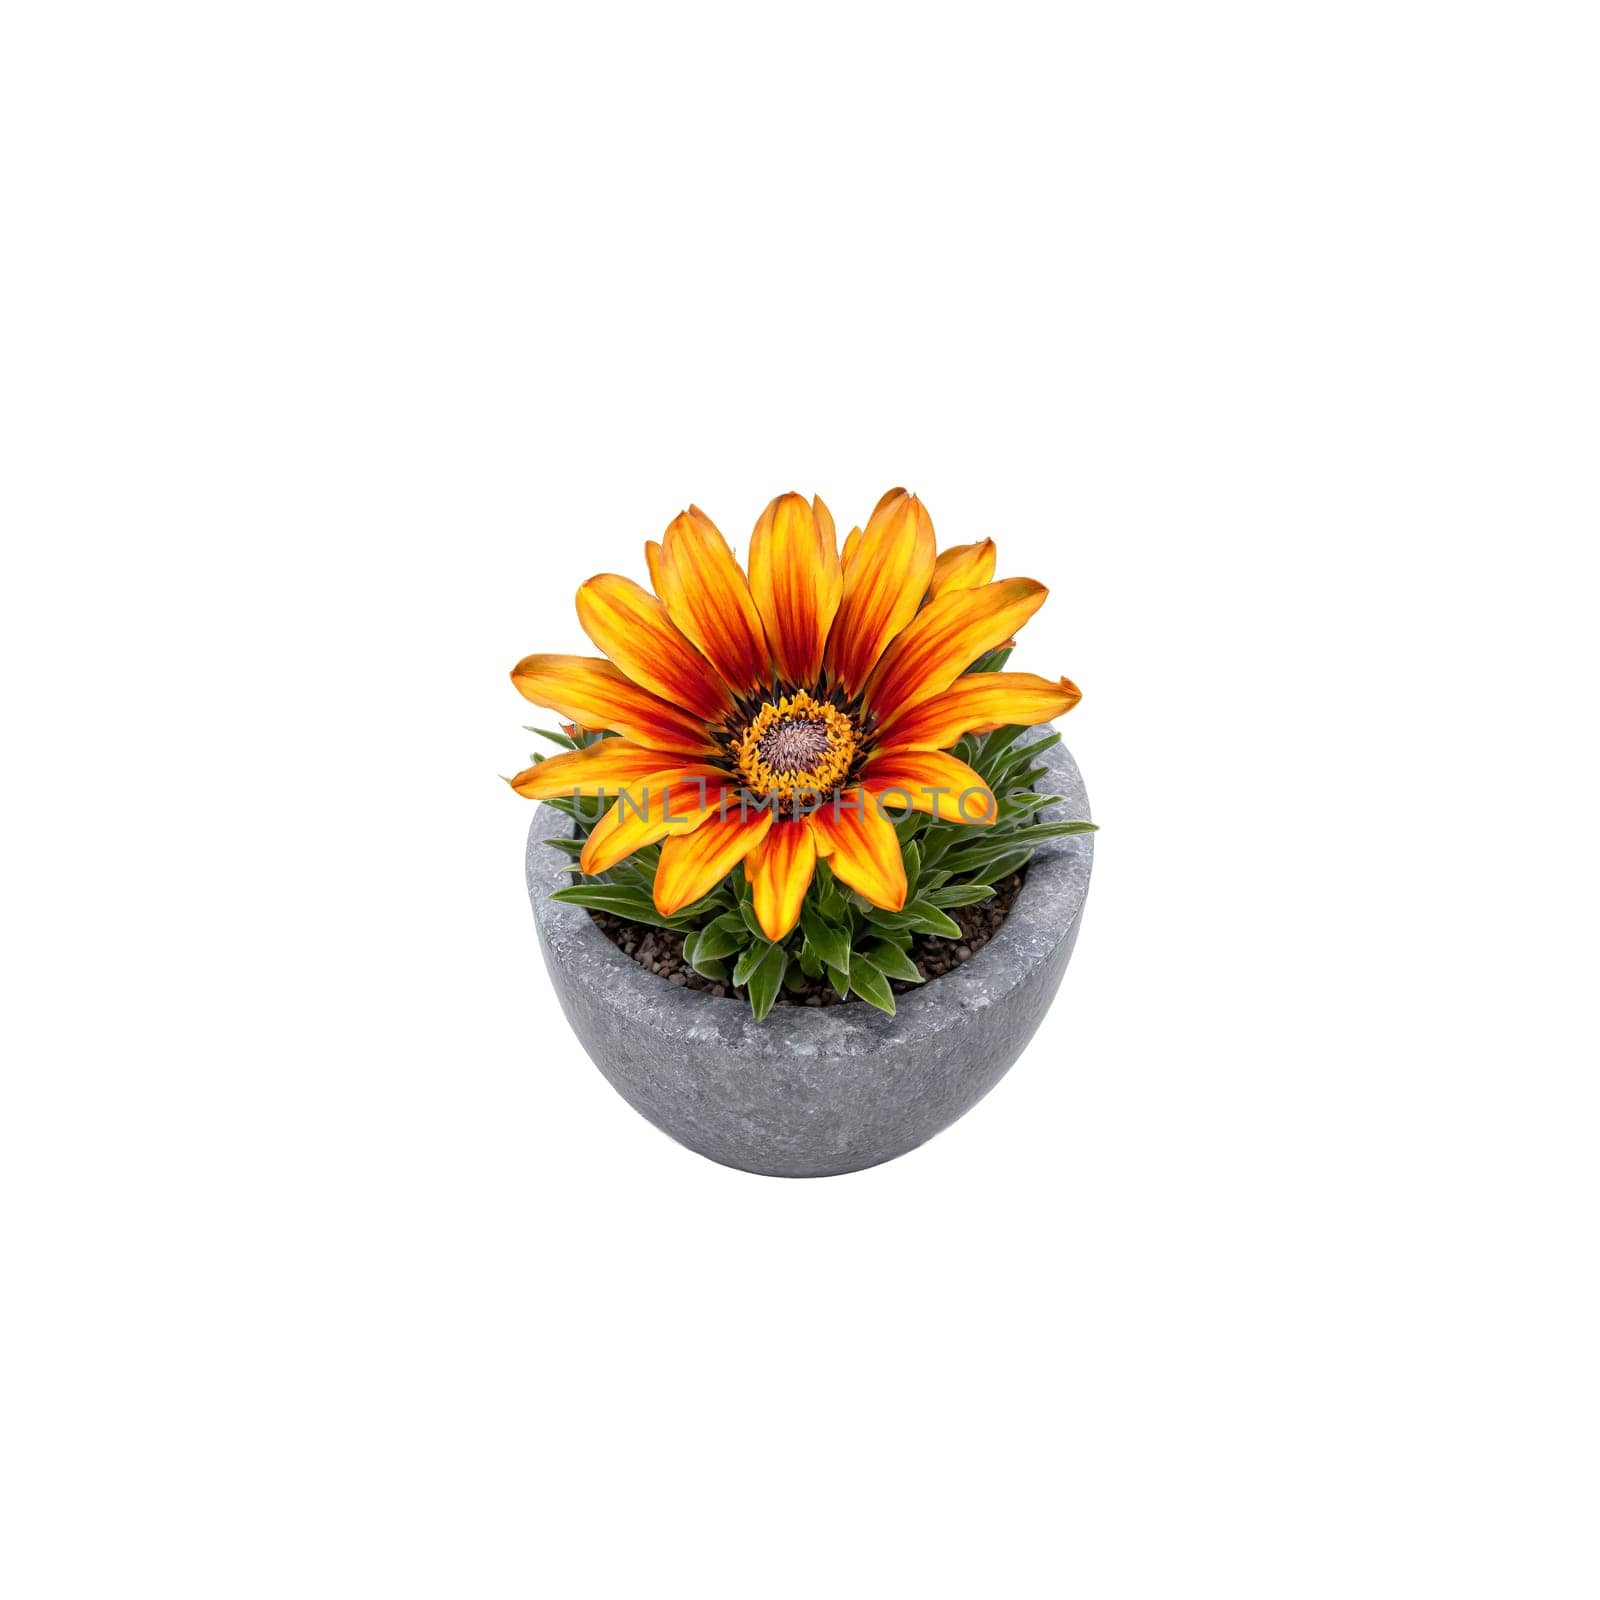 Gazania bright orange and yellow flowers with contrasting dark centers in a gray stone planter. Plants isolated on transparent background.